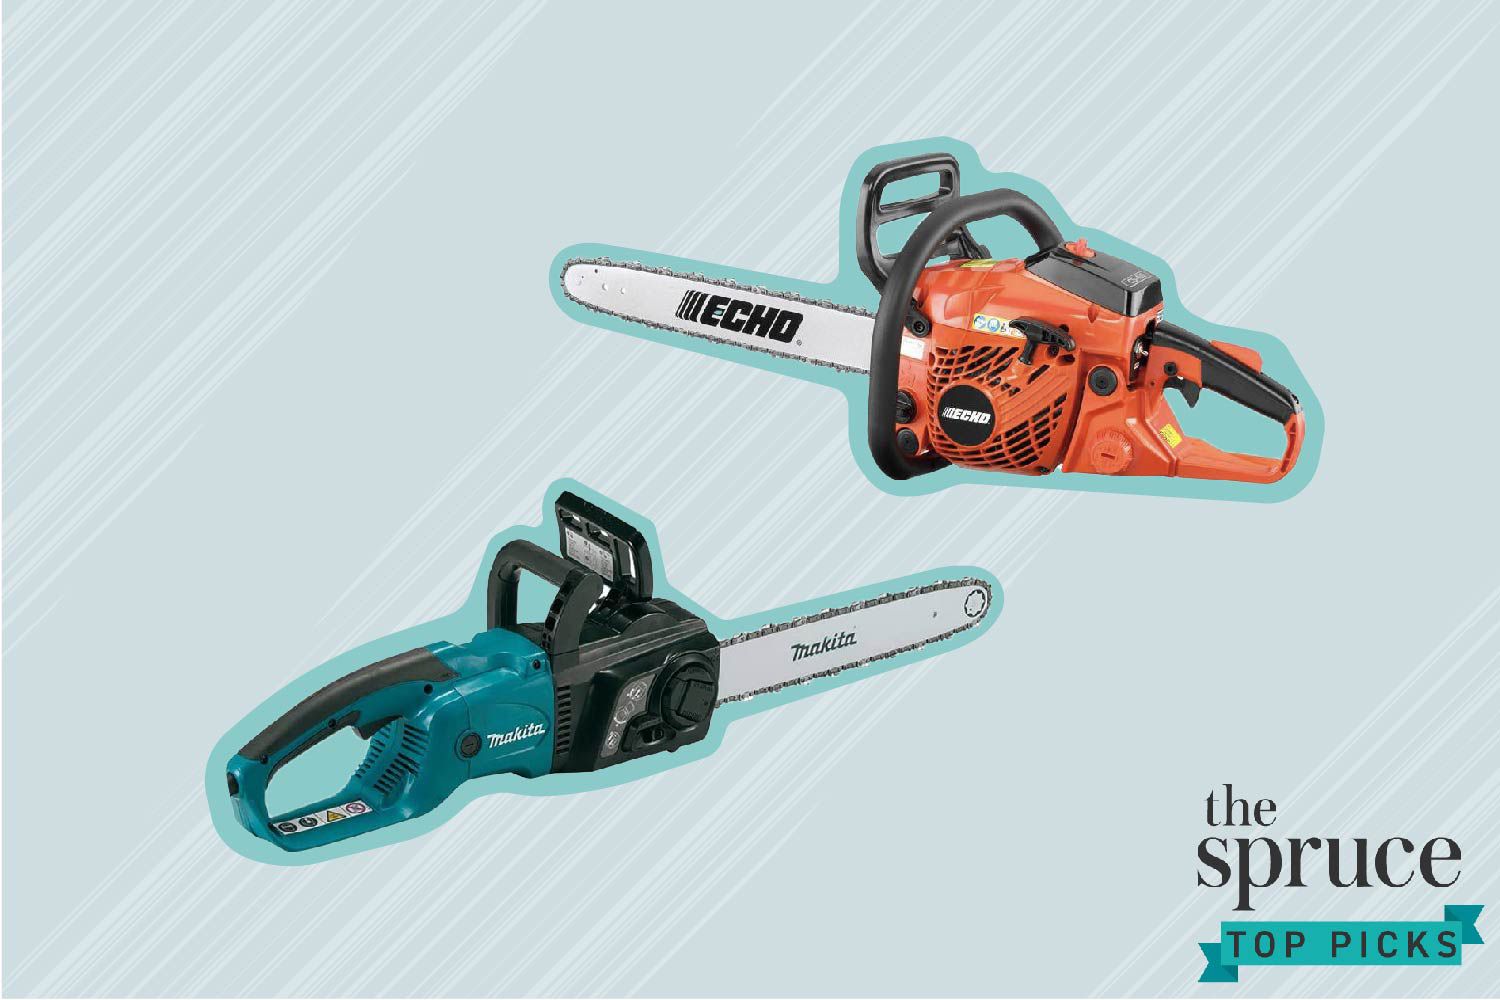 Chainsaws for Tackling Your Biggest Outdoor Cleanup Projects